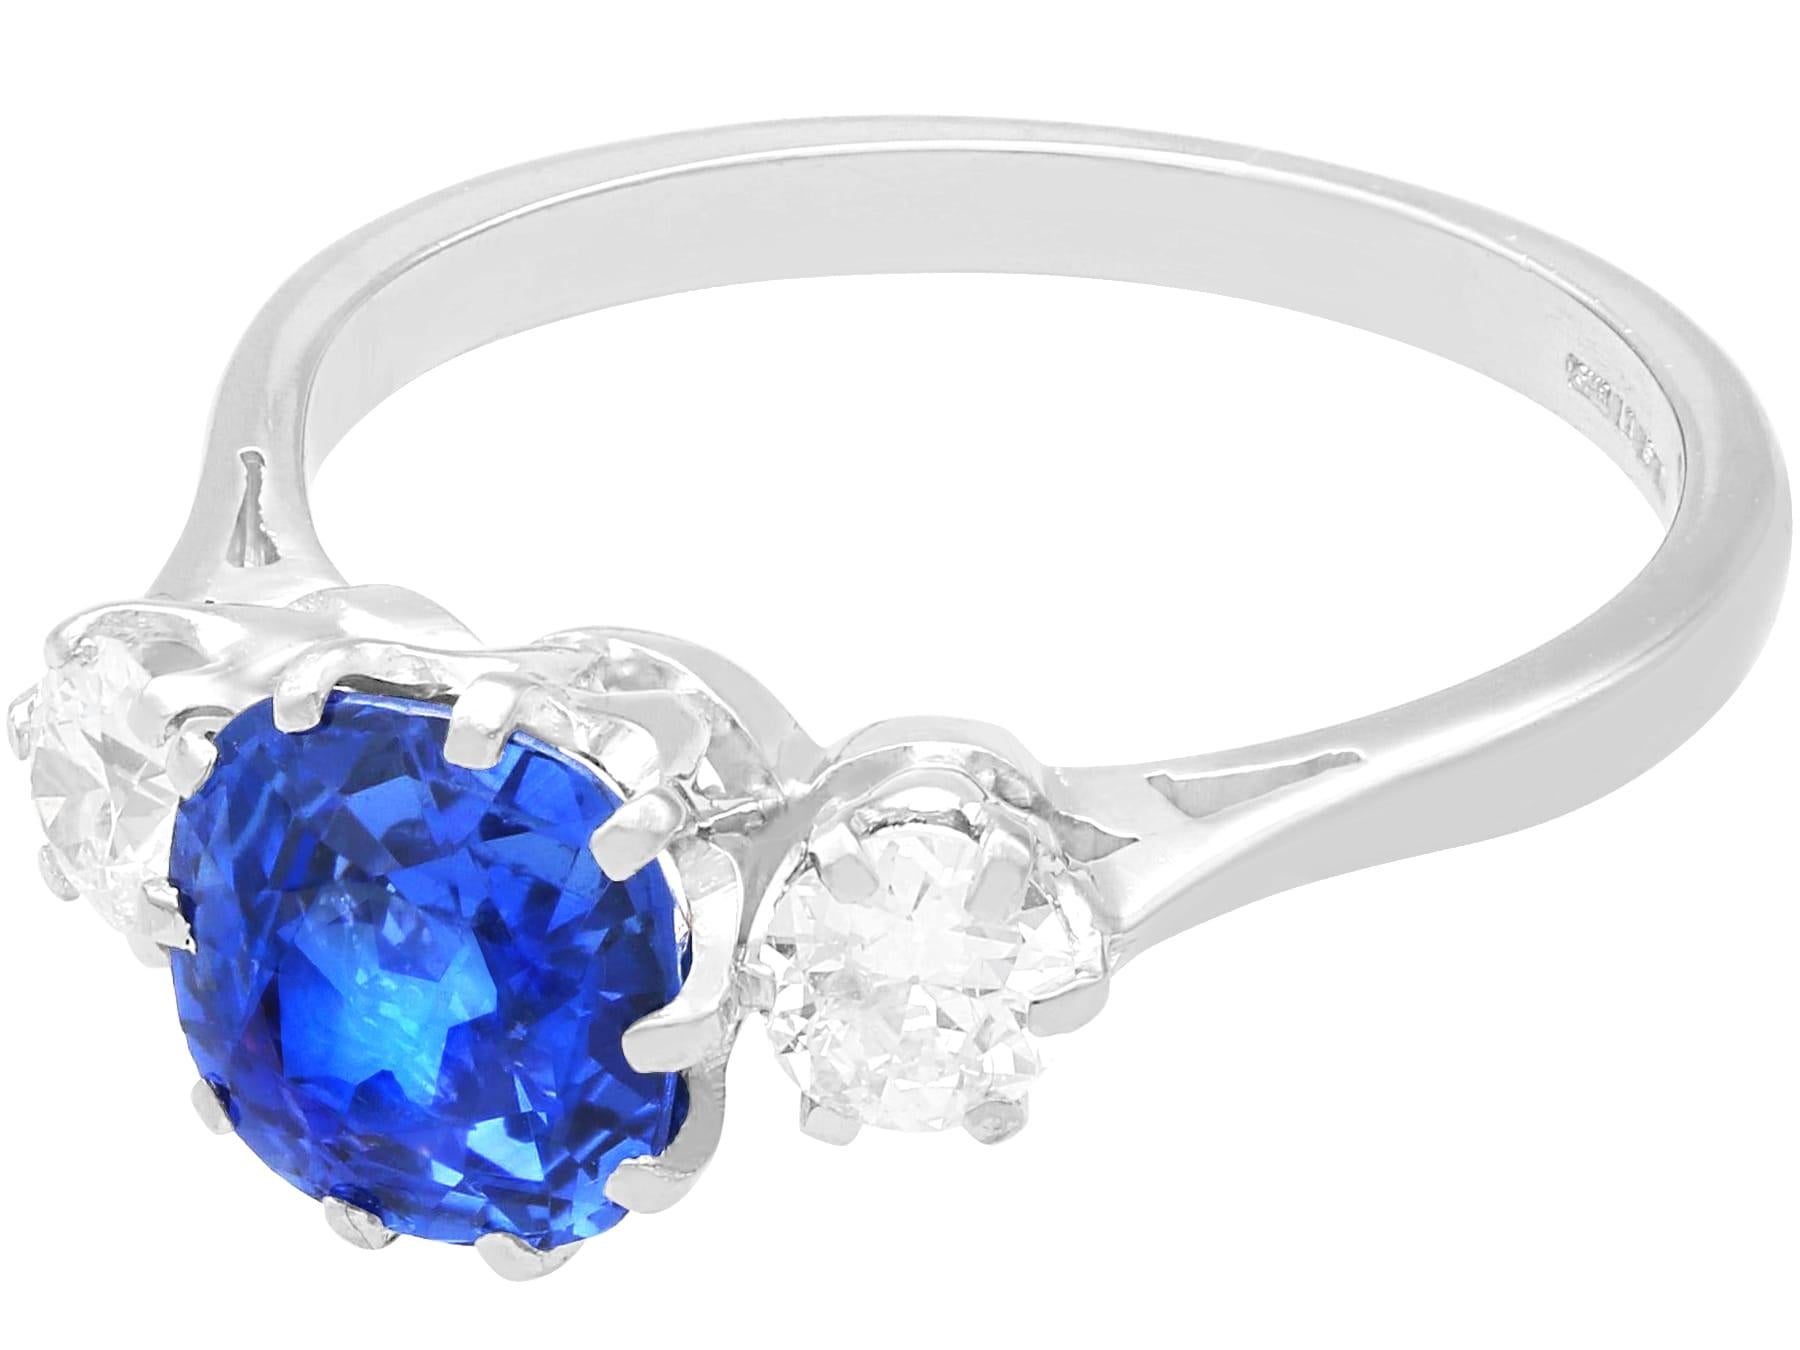 Antique Cushion Cut Antique 2.20ct Sapphire and 0.72ct Diamond, 18ct White Gold Trilogy Ring For Sale